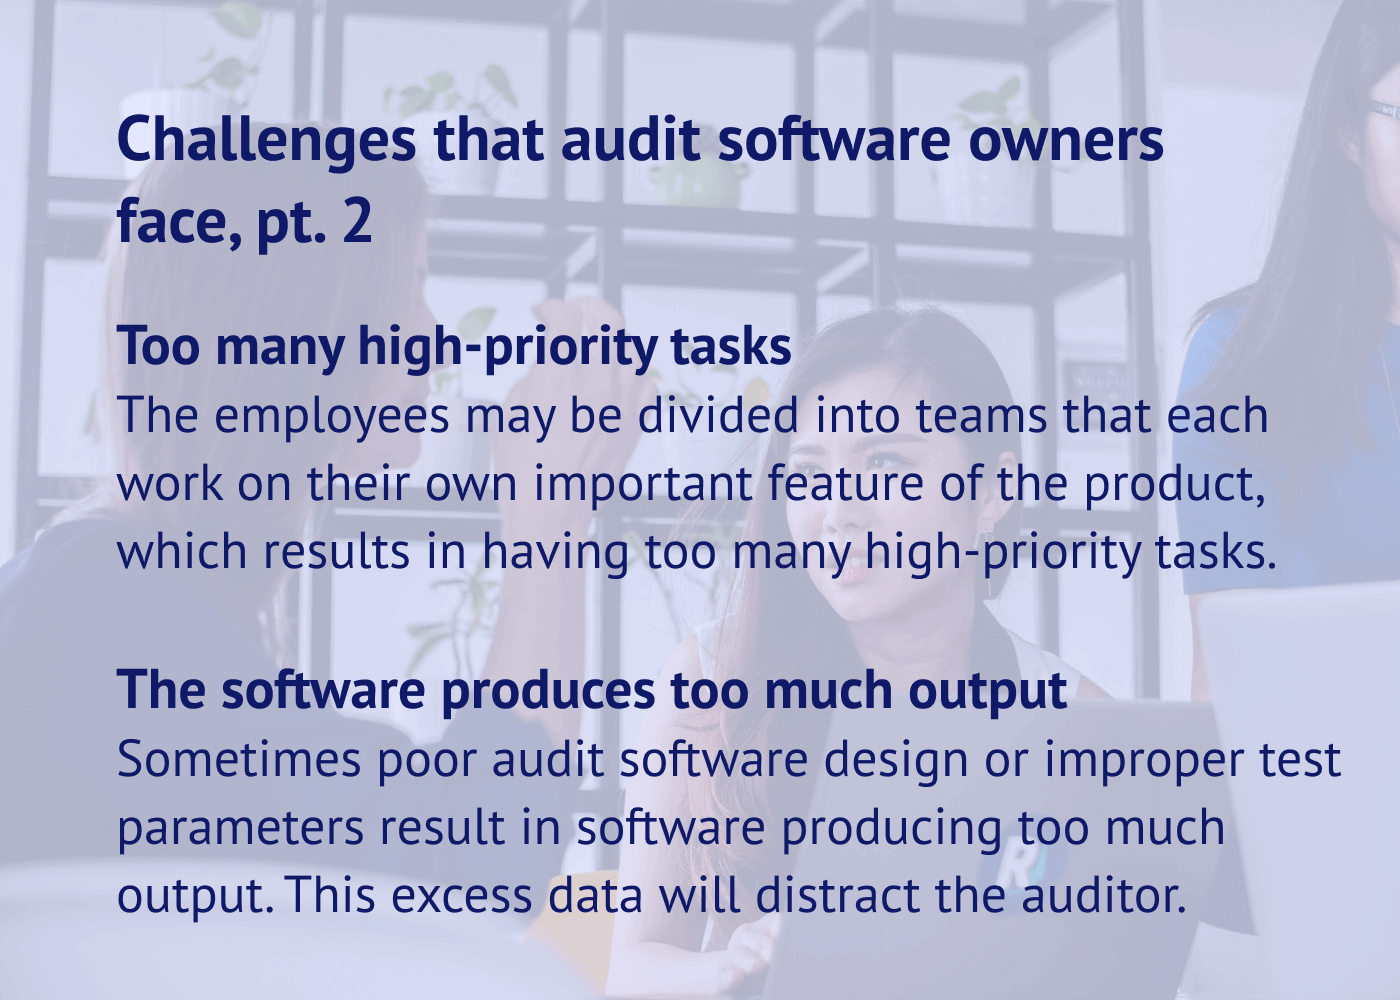 Challenges of audit software owners, part 2.